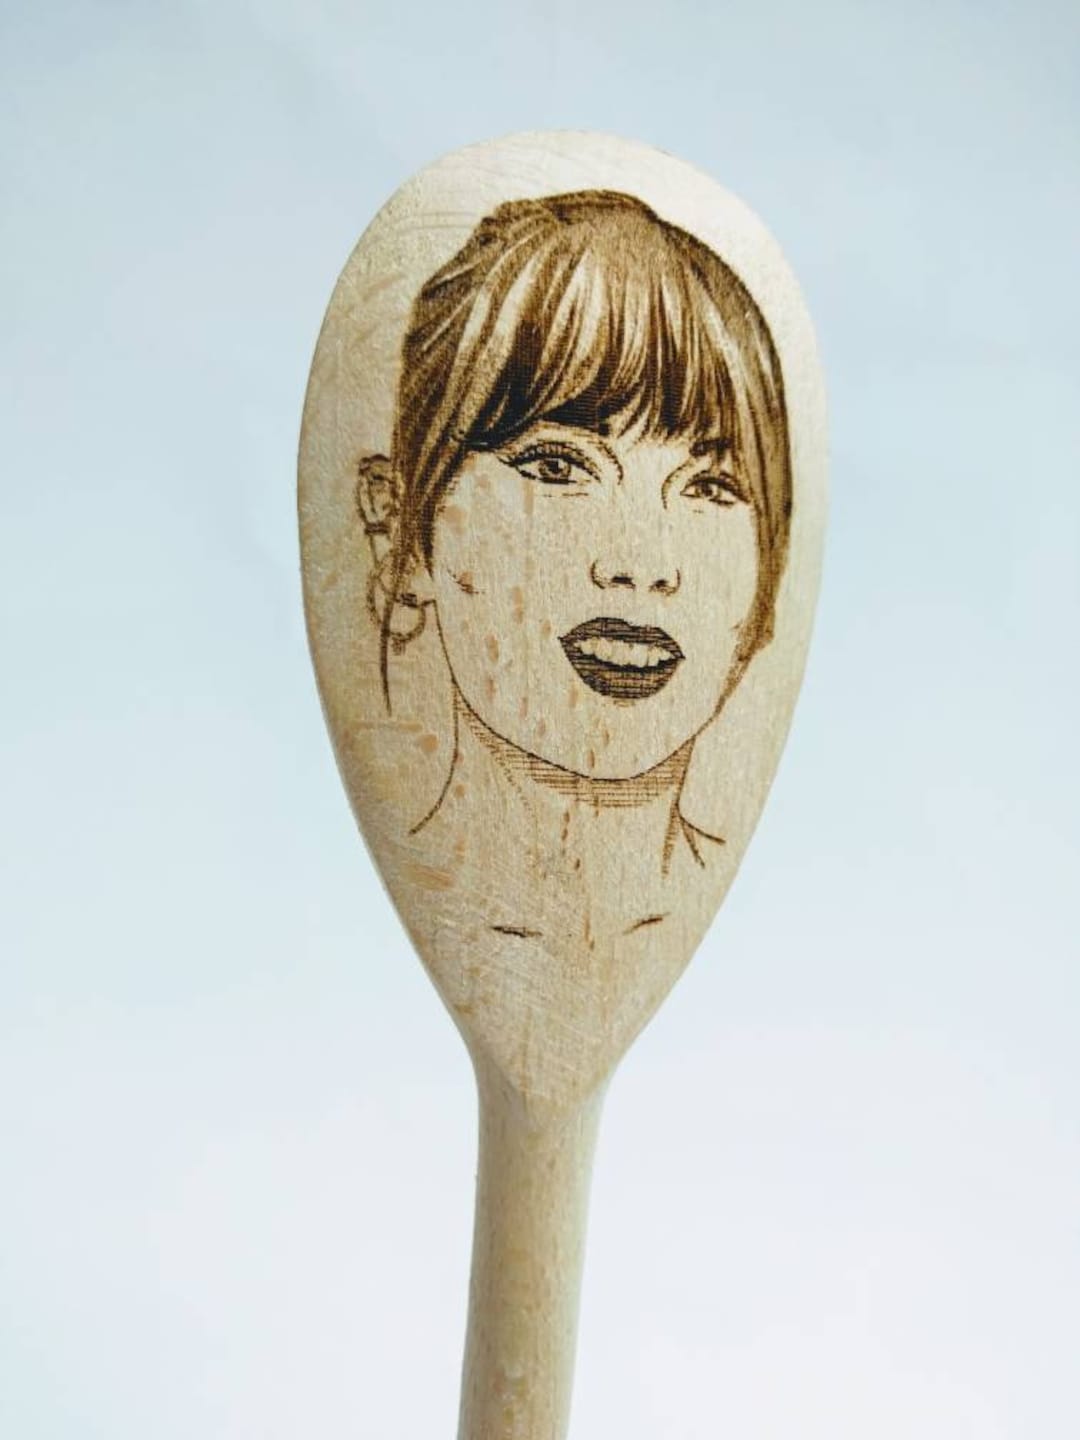 Personalized Decorative Wooden Spoons and Forks (Kitchen, Housewarming –  Too Stinkin' Cute